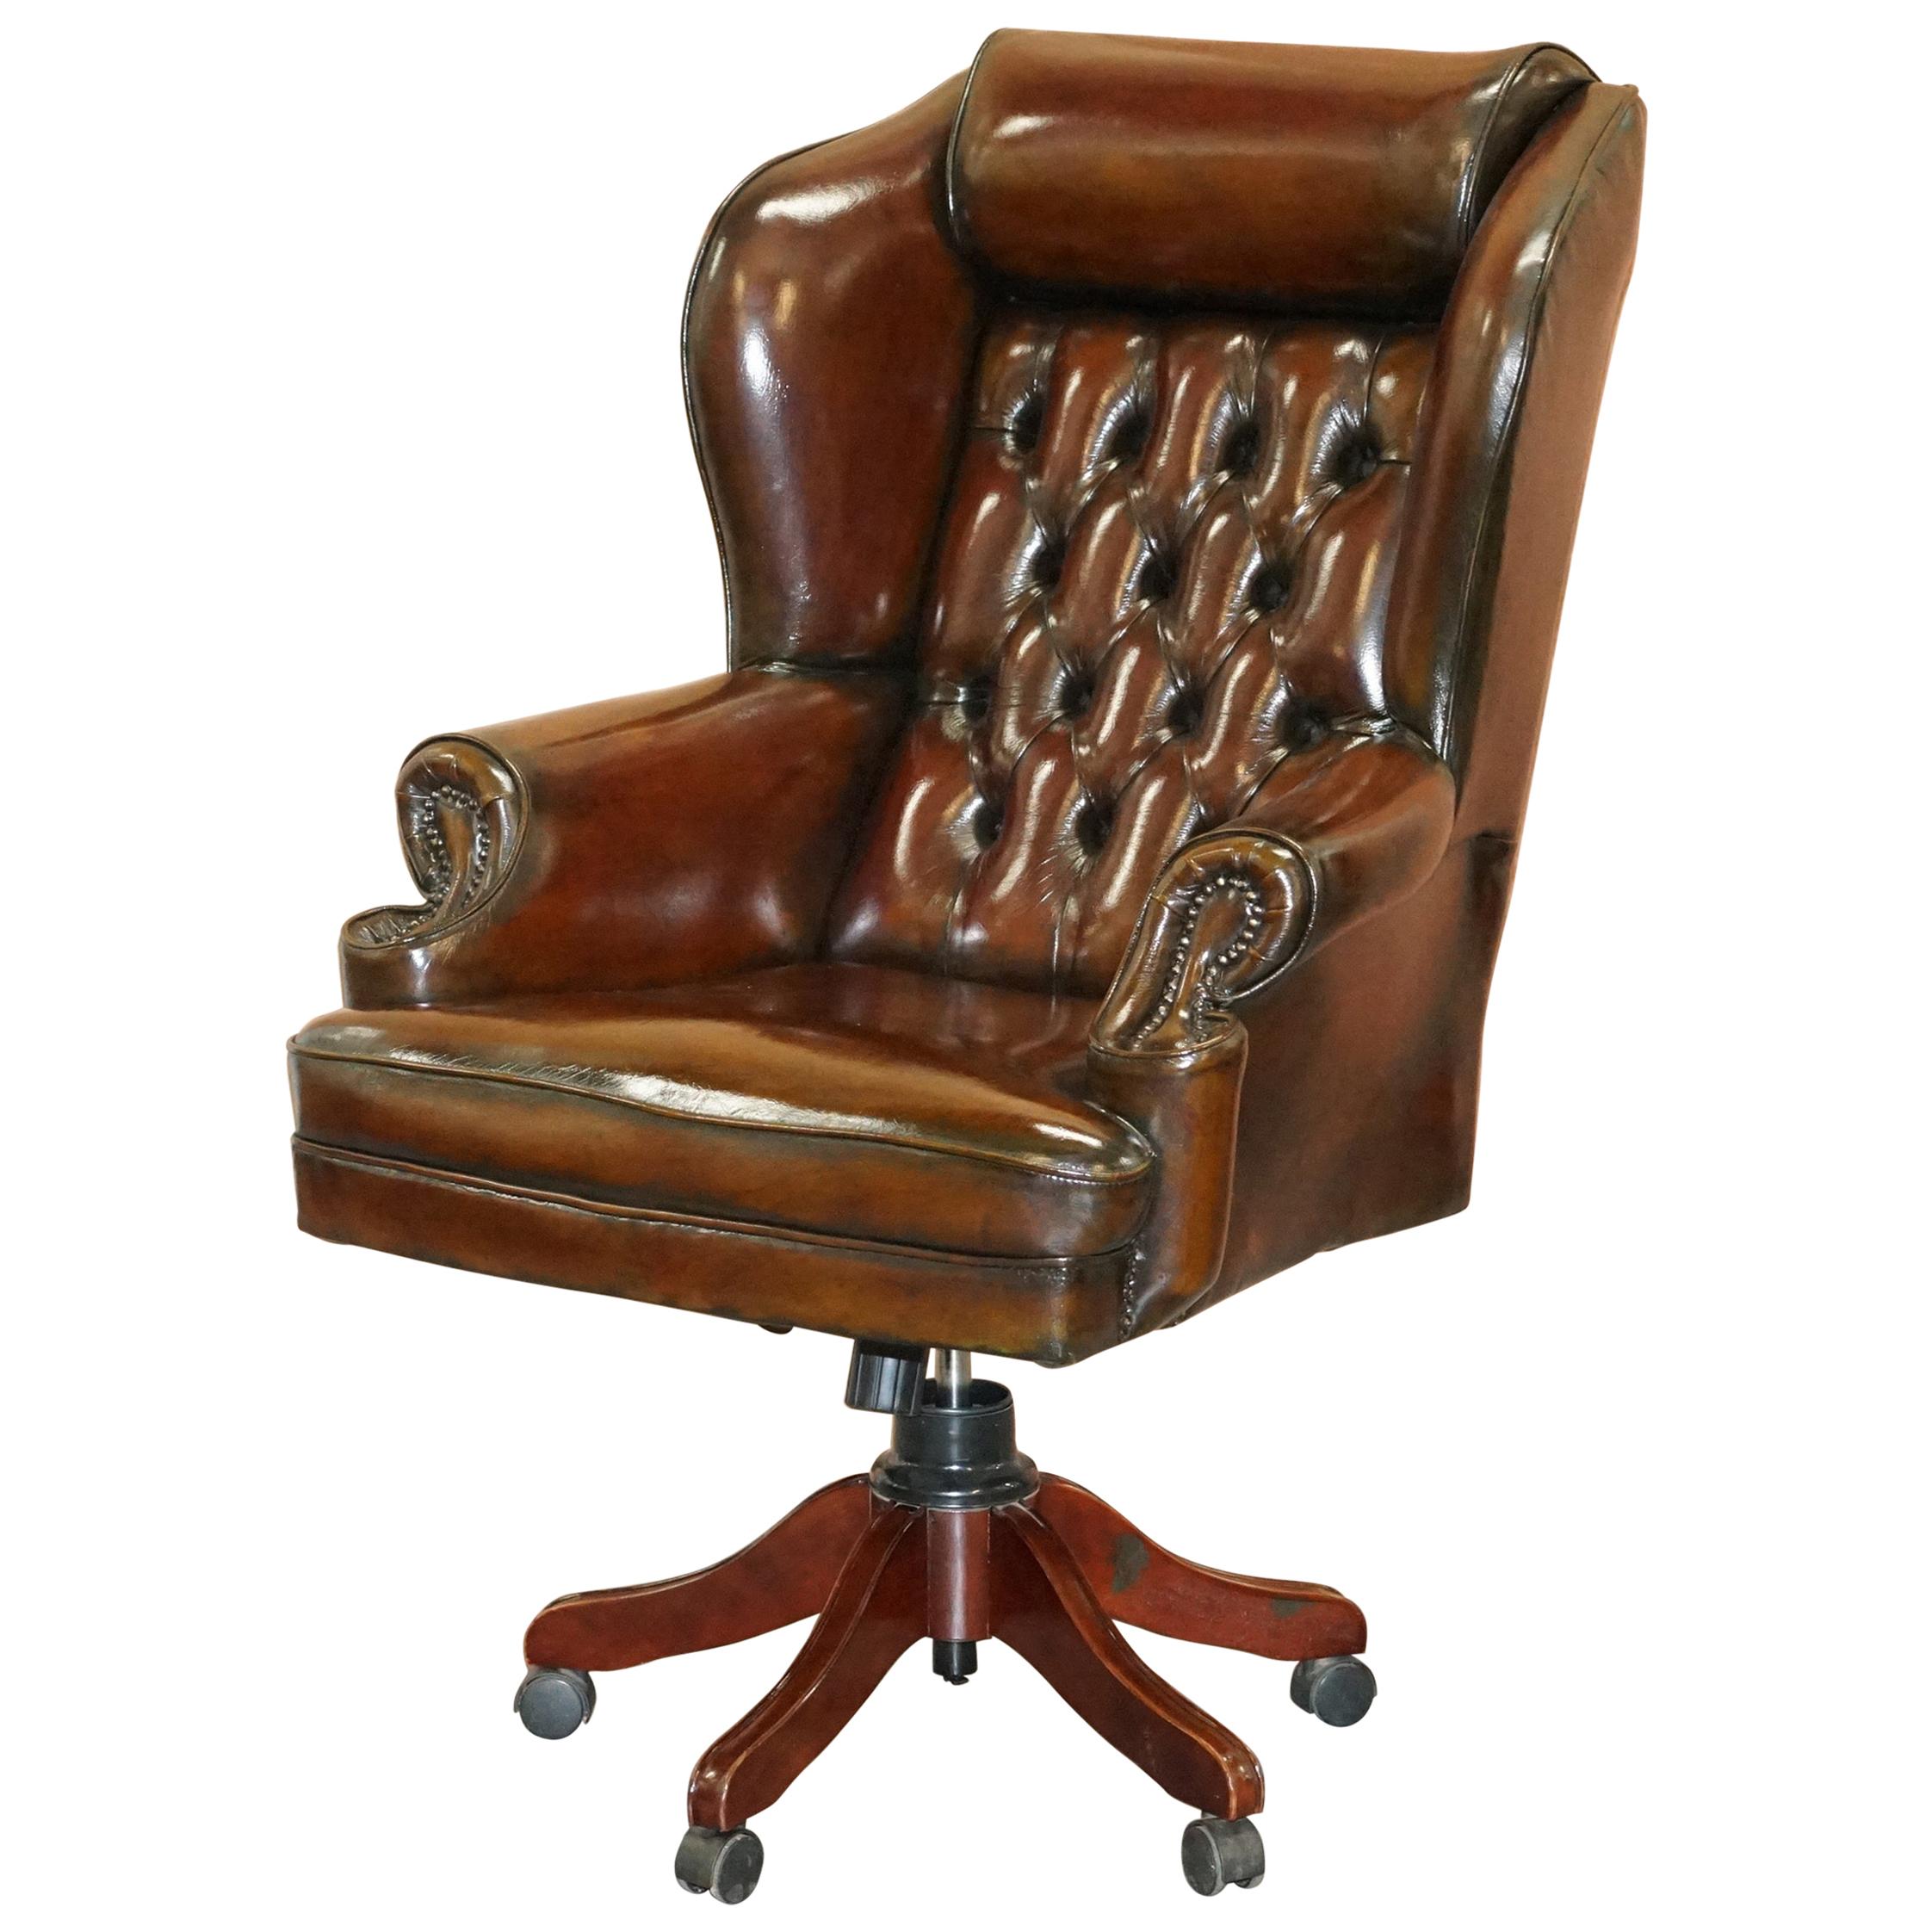 Harrods Restored Hand Dyed President Brown Leather Directors Captains Chair